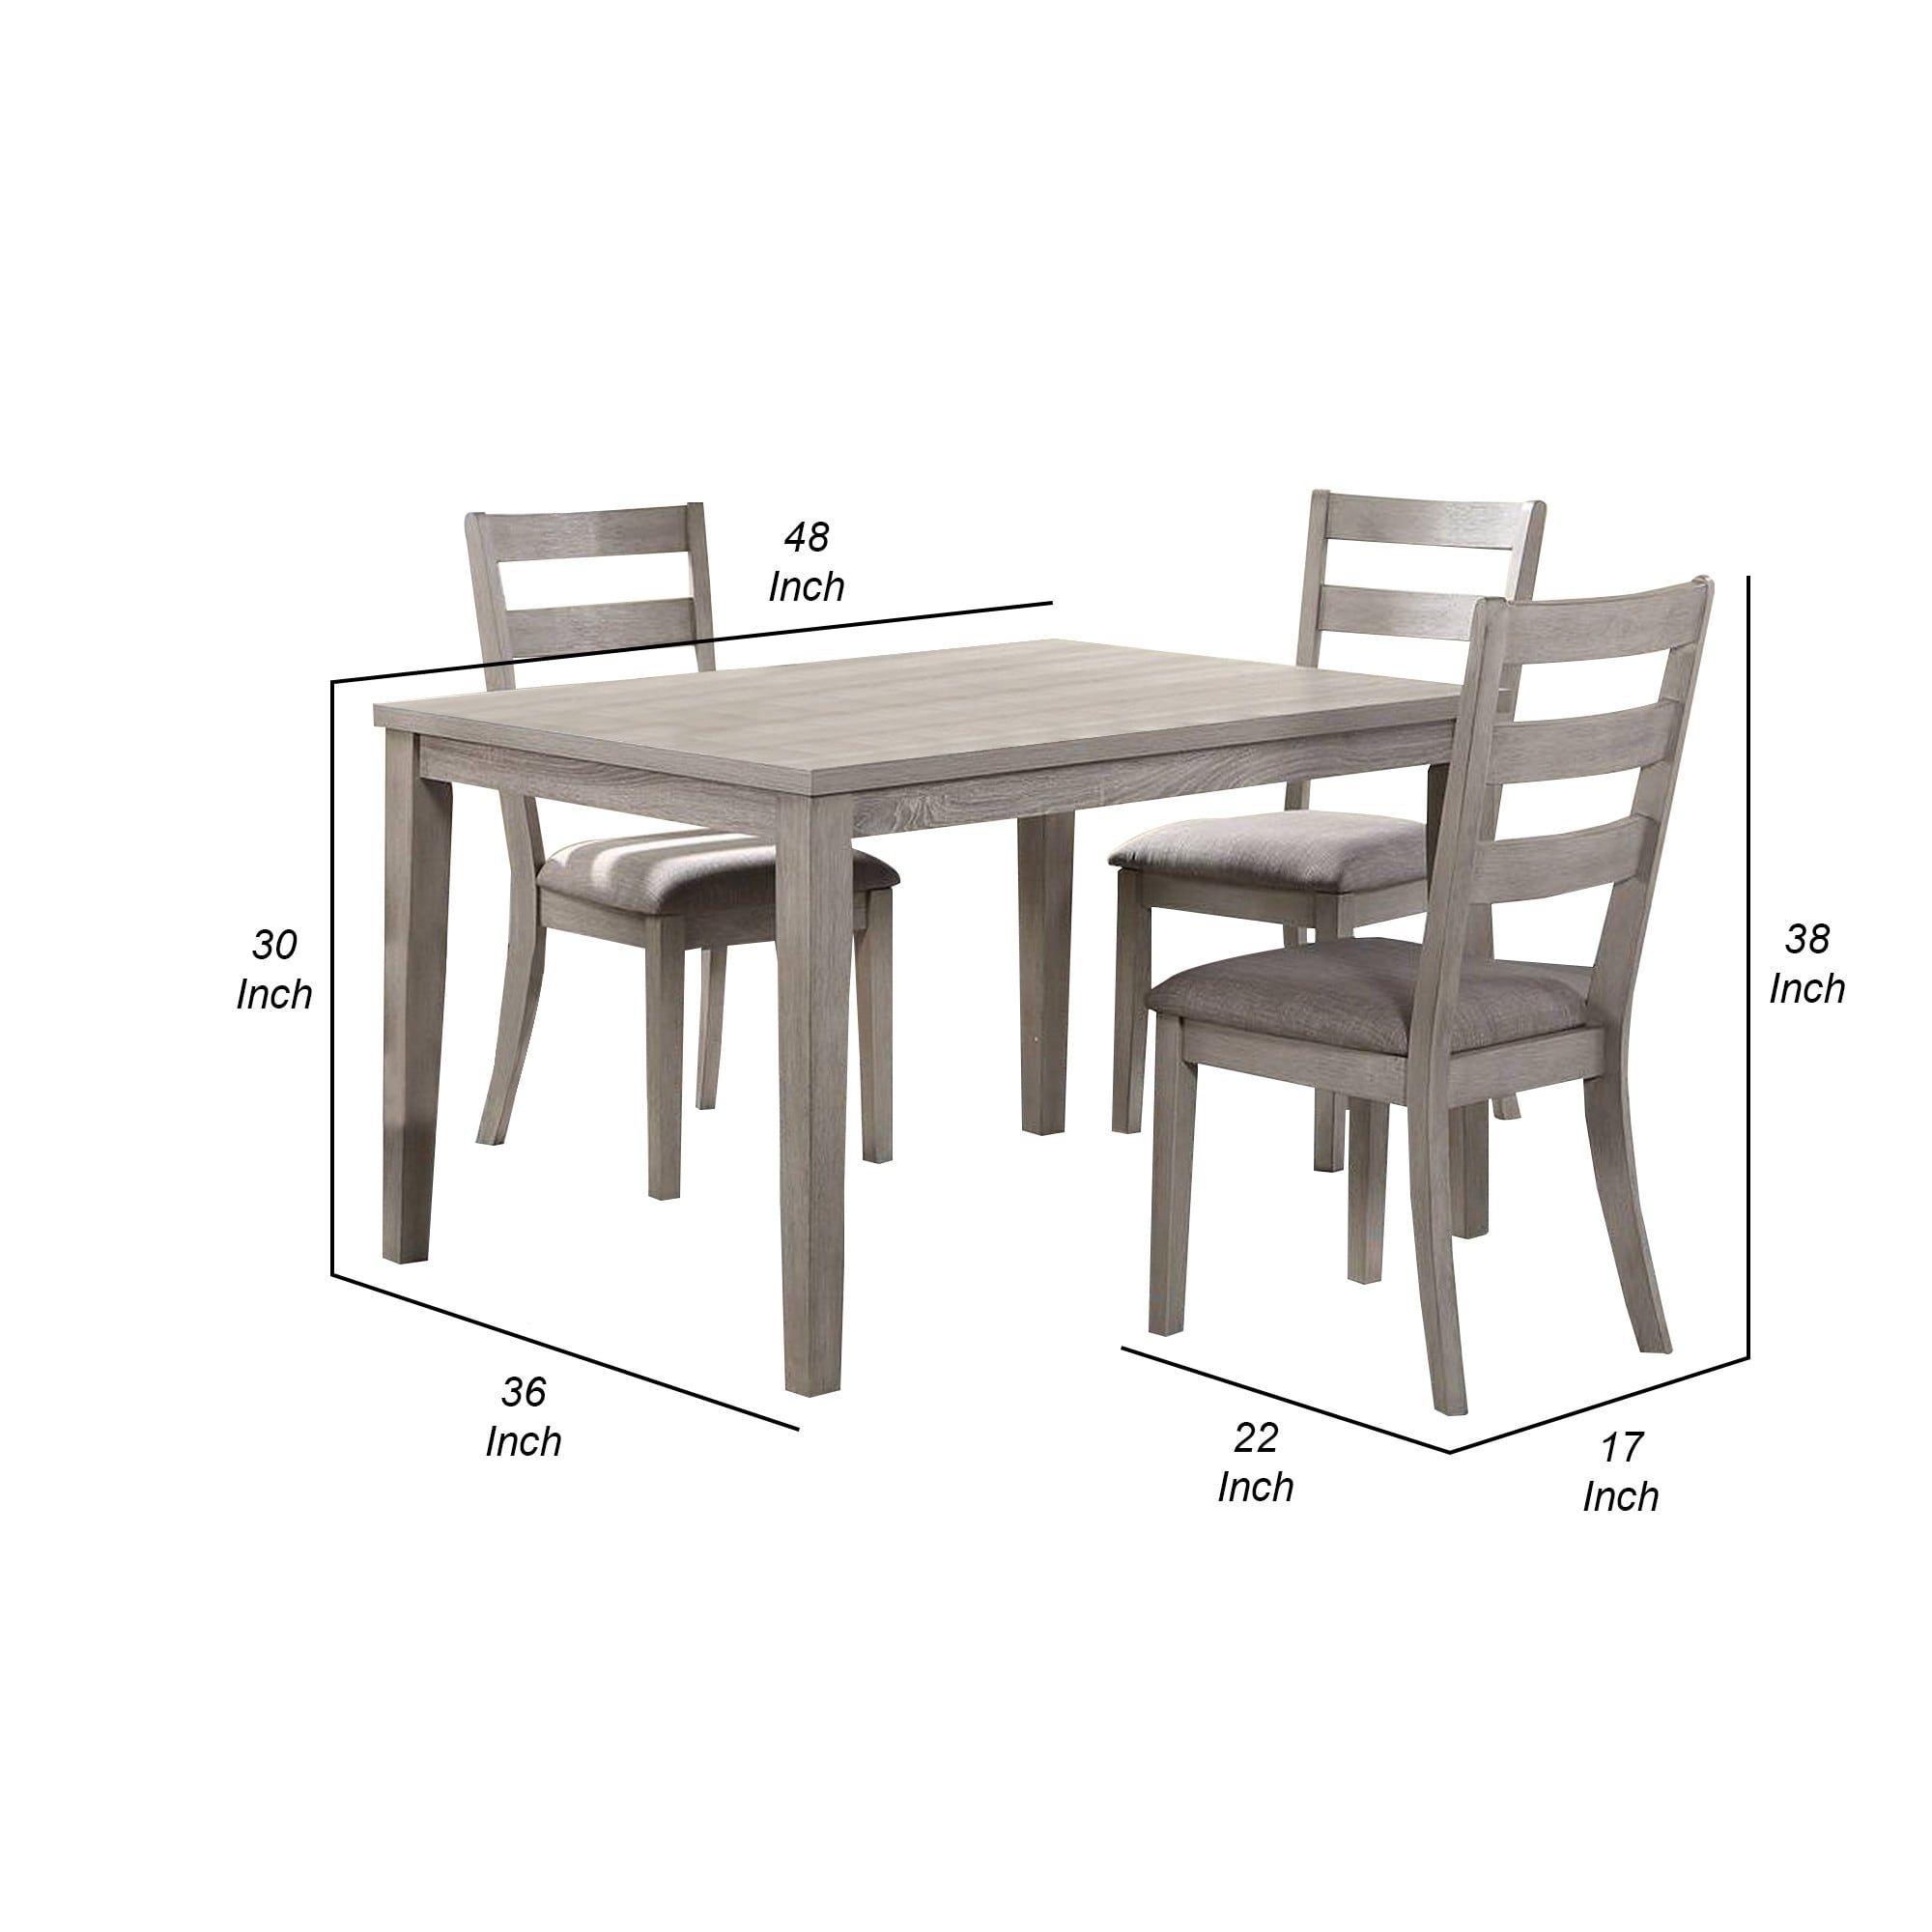 5 Piece Dining Set, Rectangular Table, 4 Chairs, Padded Seating, Light Gray